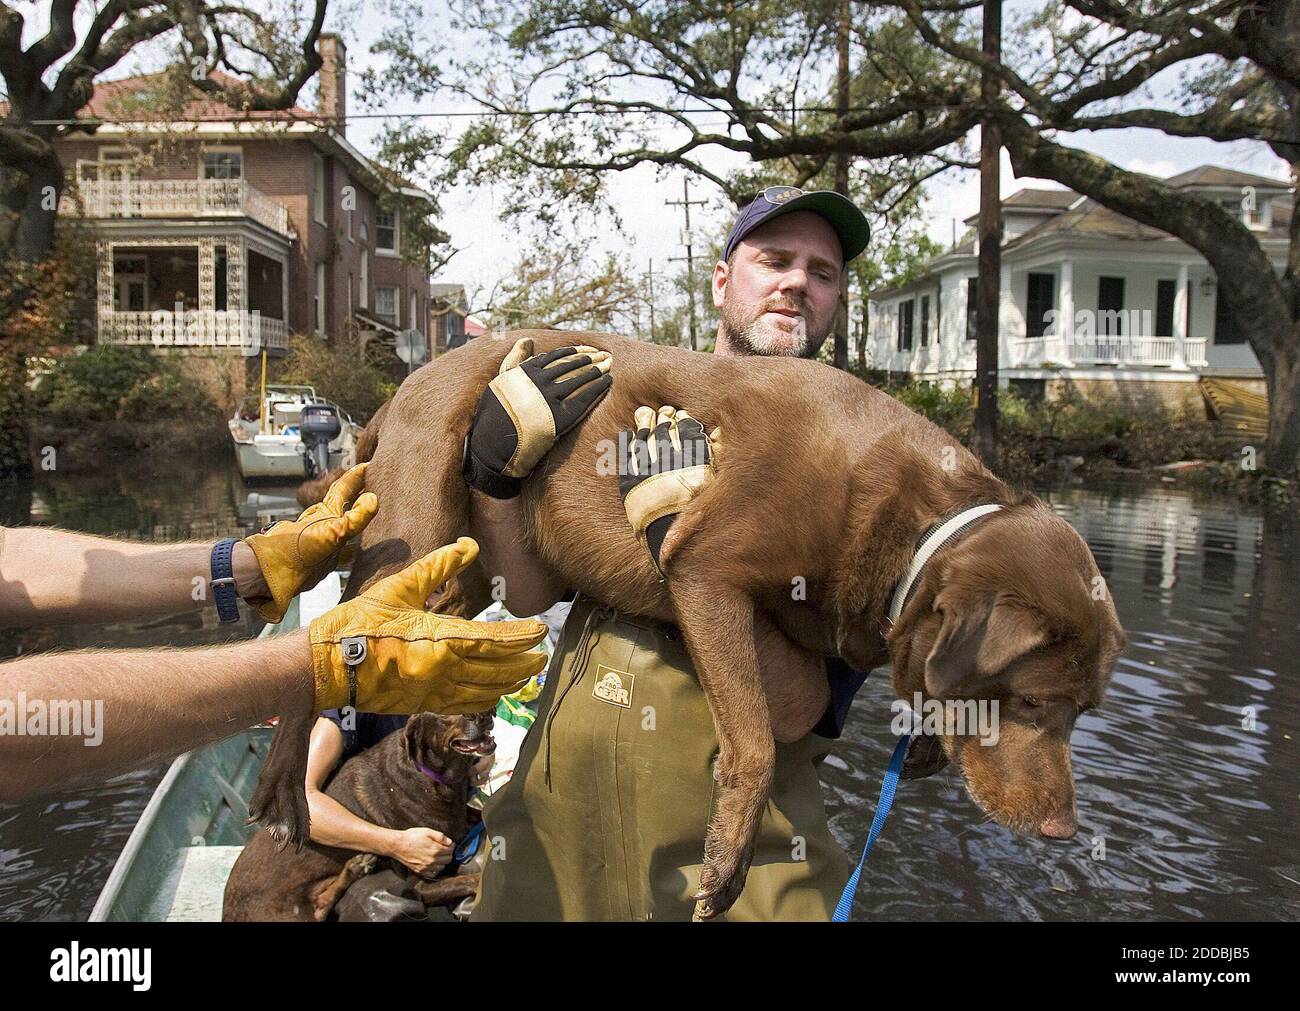 NO FILM, NO VIDEO, NO TV, NO DOCUMENTARY - Humane Society of the United States animal rescue crew member Bruce Earnest lifts a dog rescued from a flooded home in the Garden district of New Orleans, Louisiana, on Saturday, Sept. 10, 2005. Rescue efforts are ongoing for animals and pets that have been left behind during the Hurricane Katrina evacuation. Photo by Greg Norman NG/Kansas City Star/KRT/ABACAPRESS.COM Stock Photo